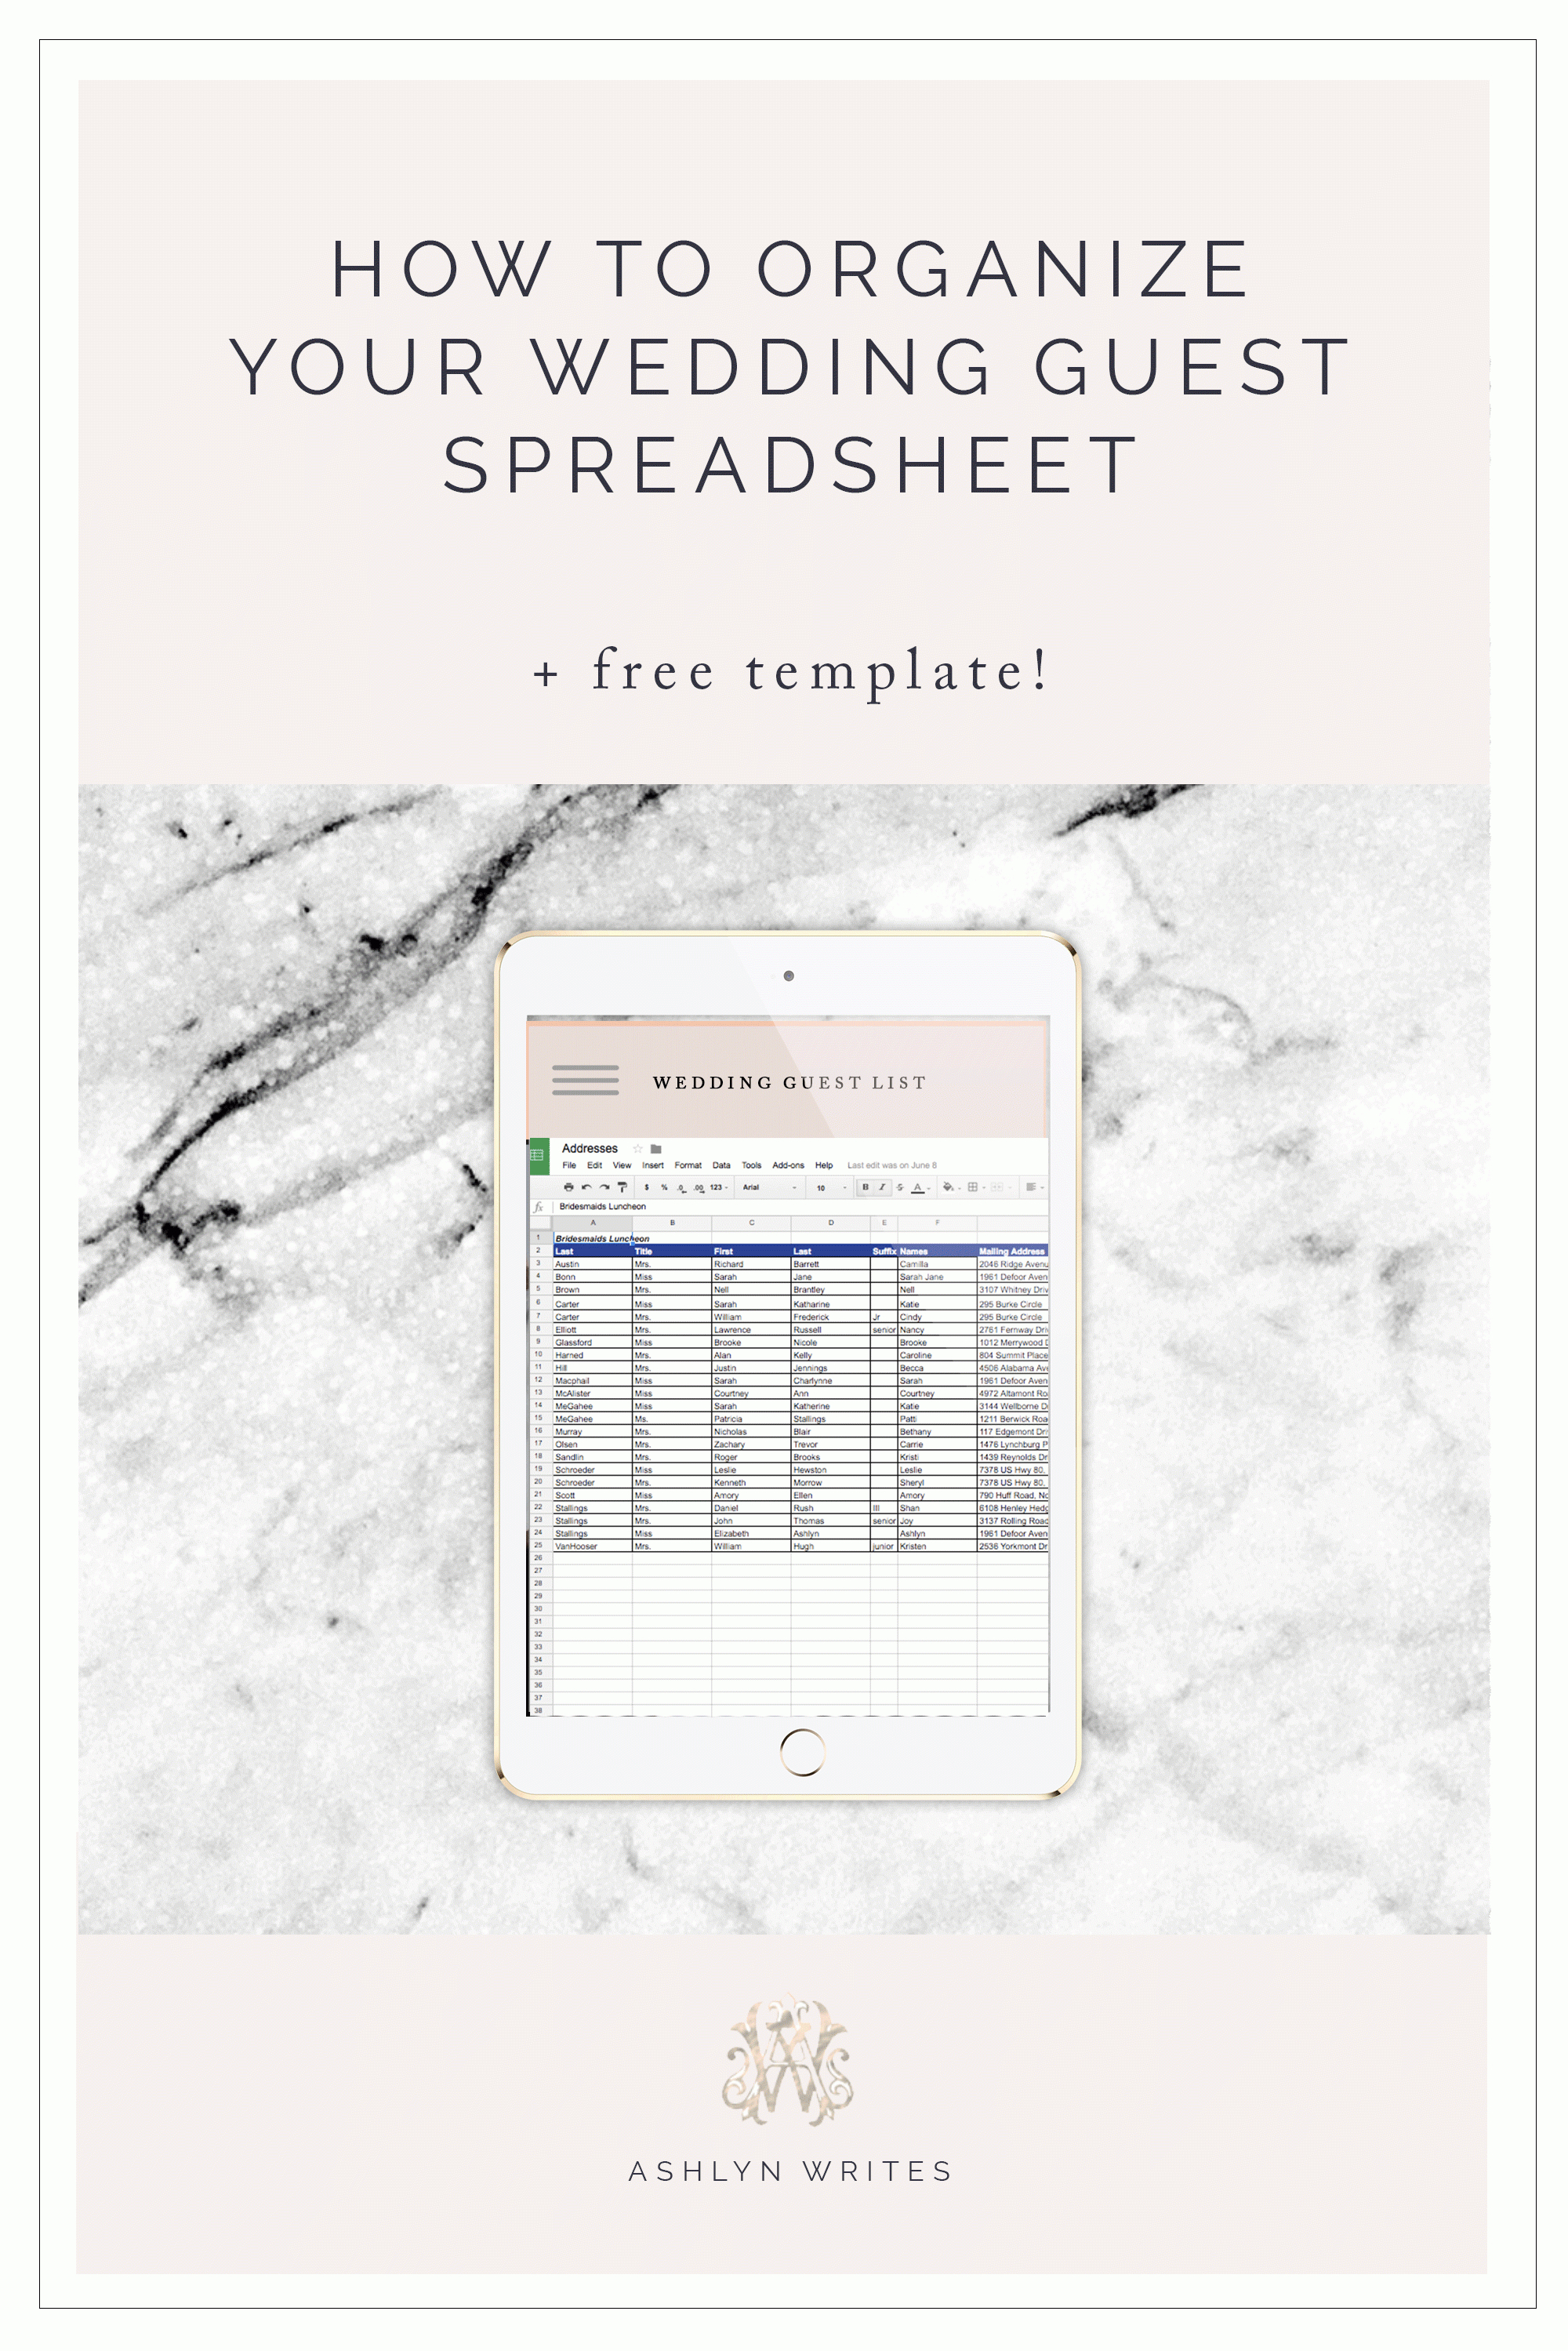 Wedding Invite Spreadsheet Intended For How To Organize A Wedding Guest List Spreadsheet + Free Template